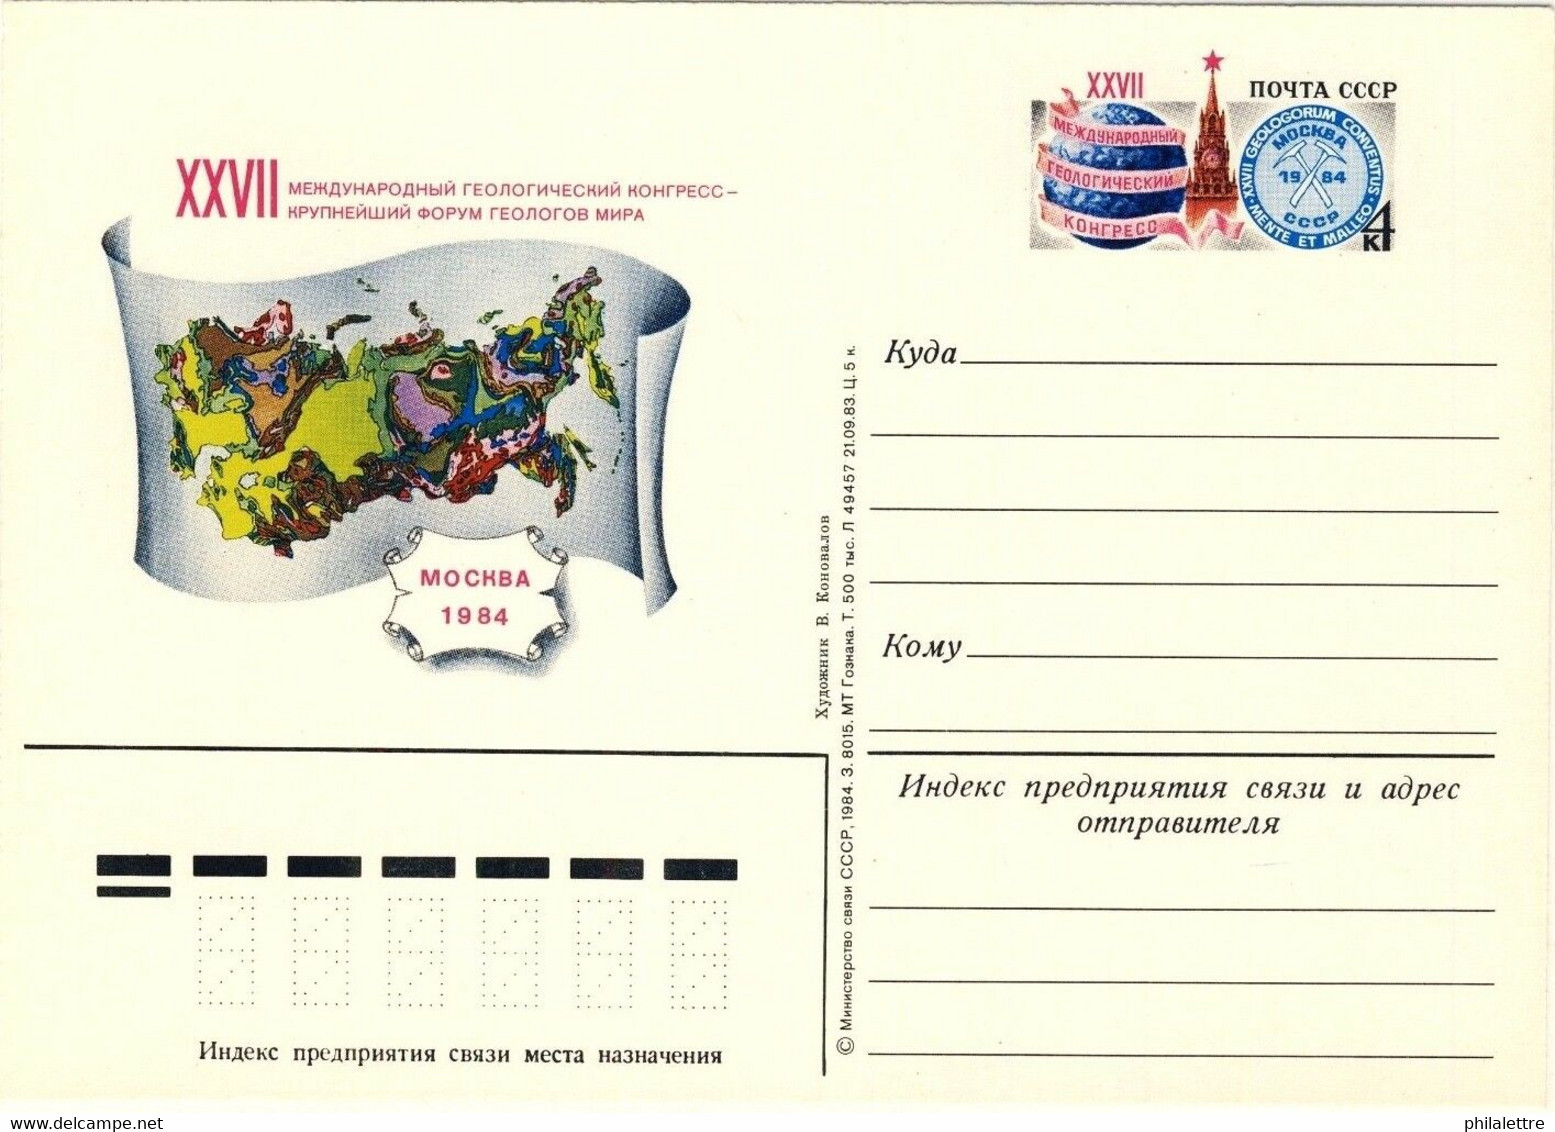 URSS Soviet Union 1984 4kp CARD 27th INT'L GEOLOGICAL CONGRESS MOSCOW Mi.PSO136 - 1980-91